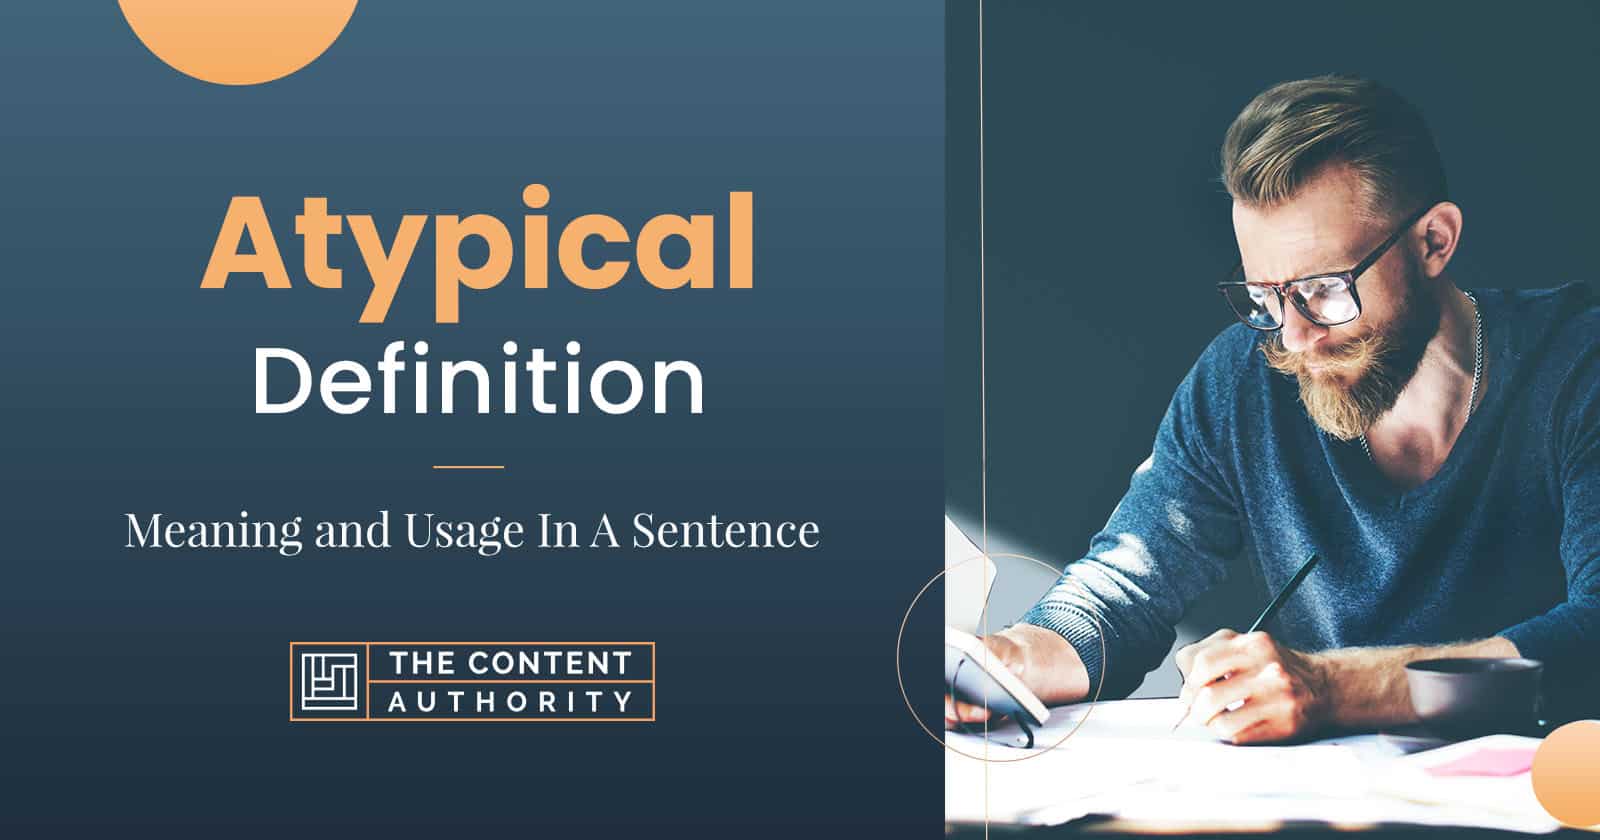 Atypical Definition &#8211; Meaning and Usage In A Sentence